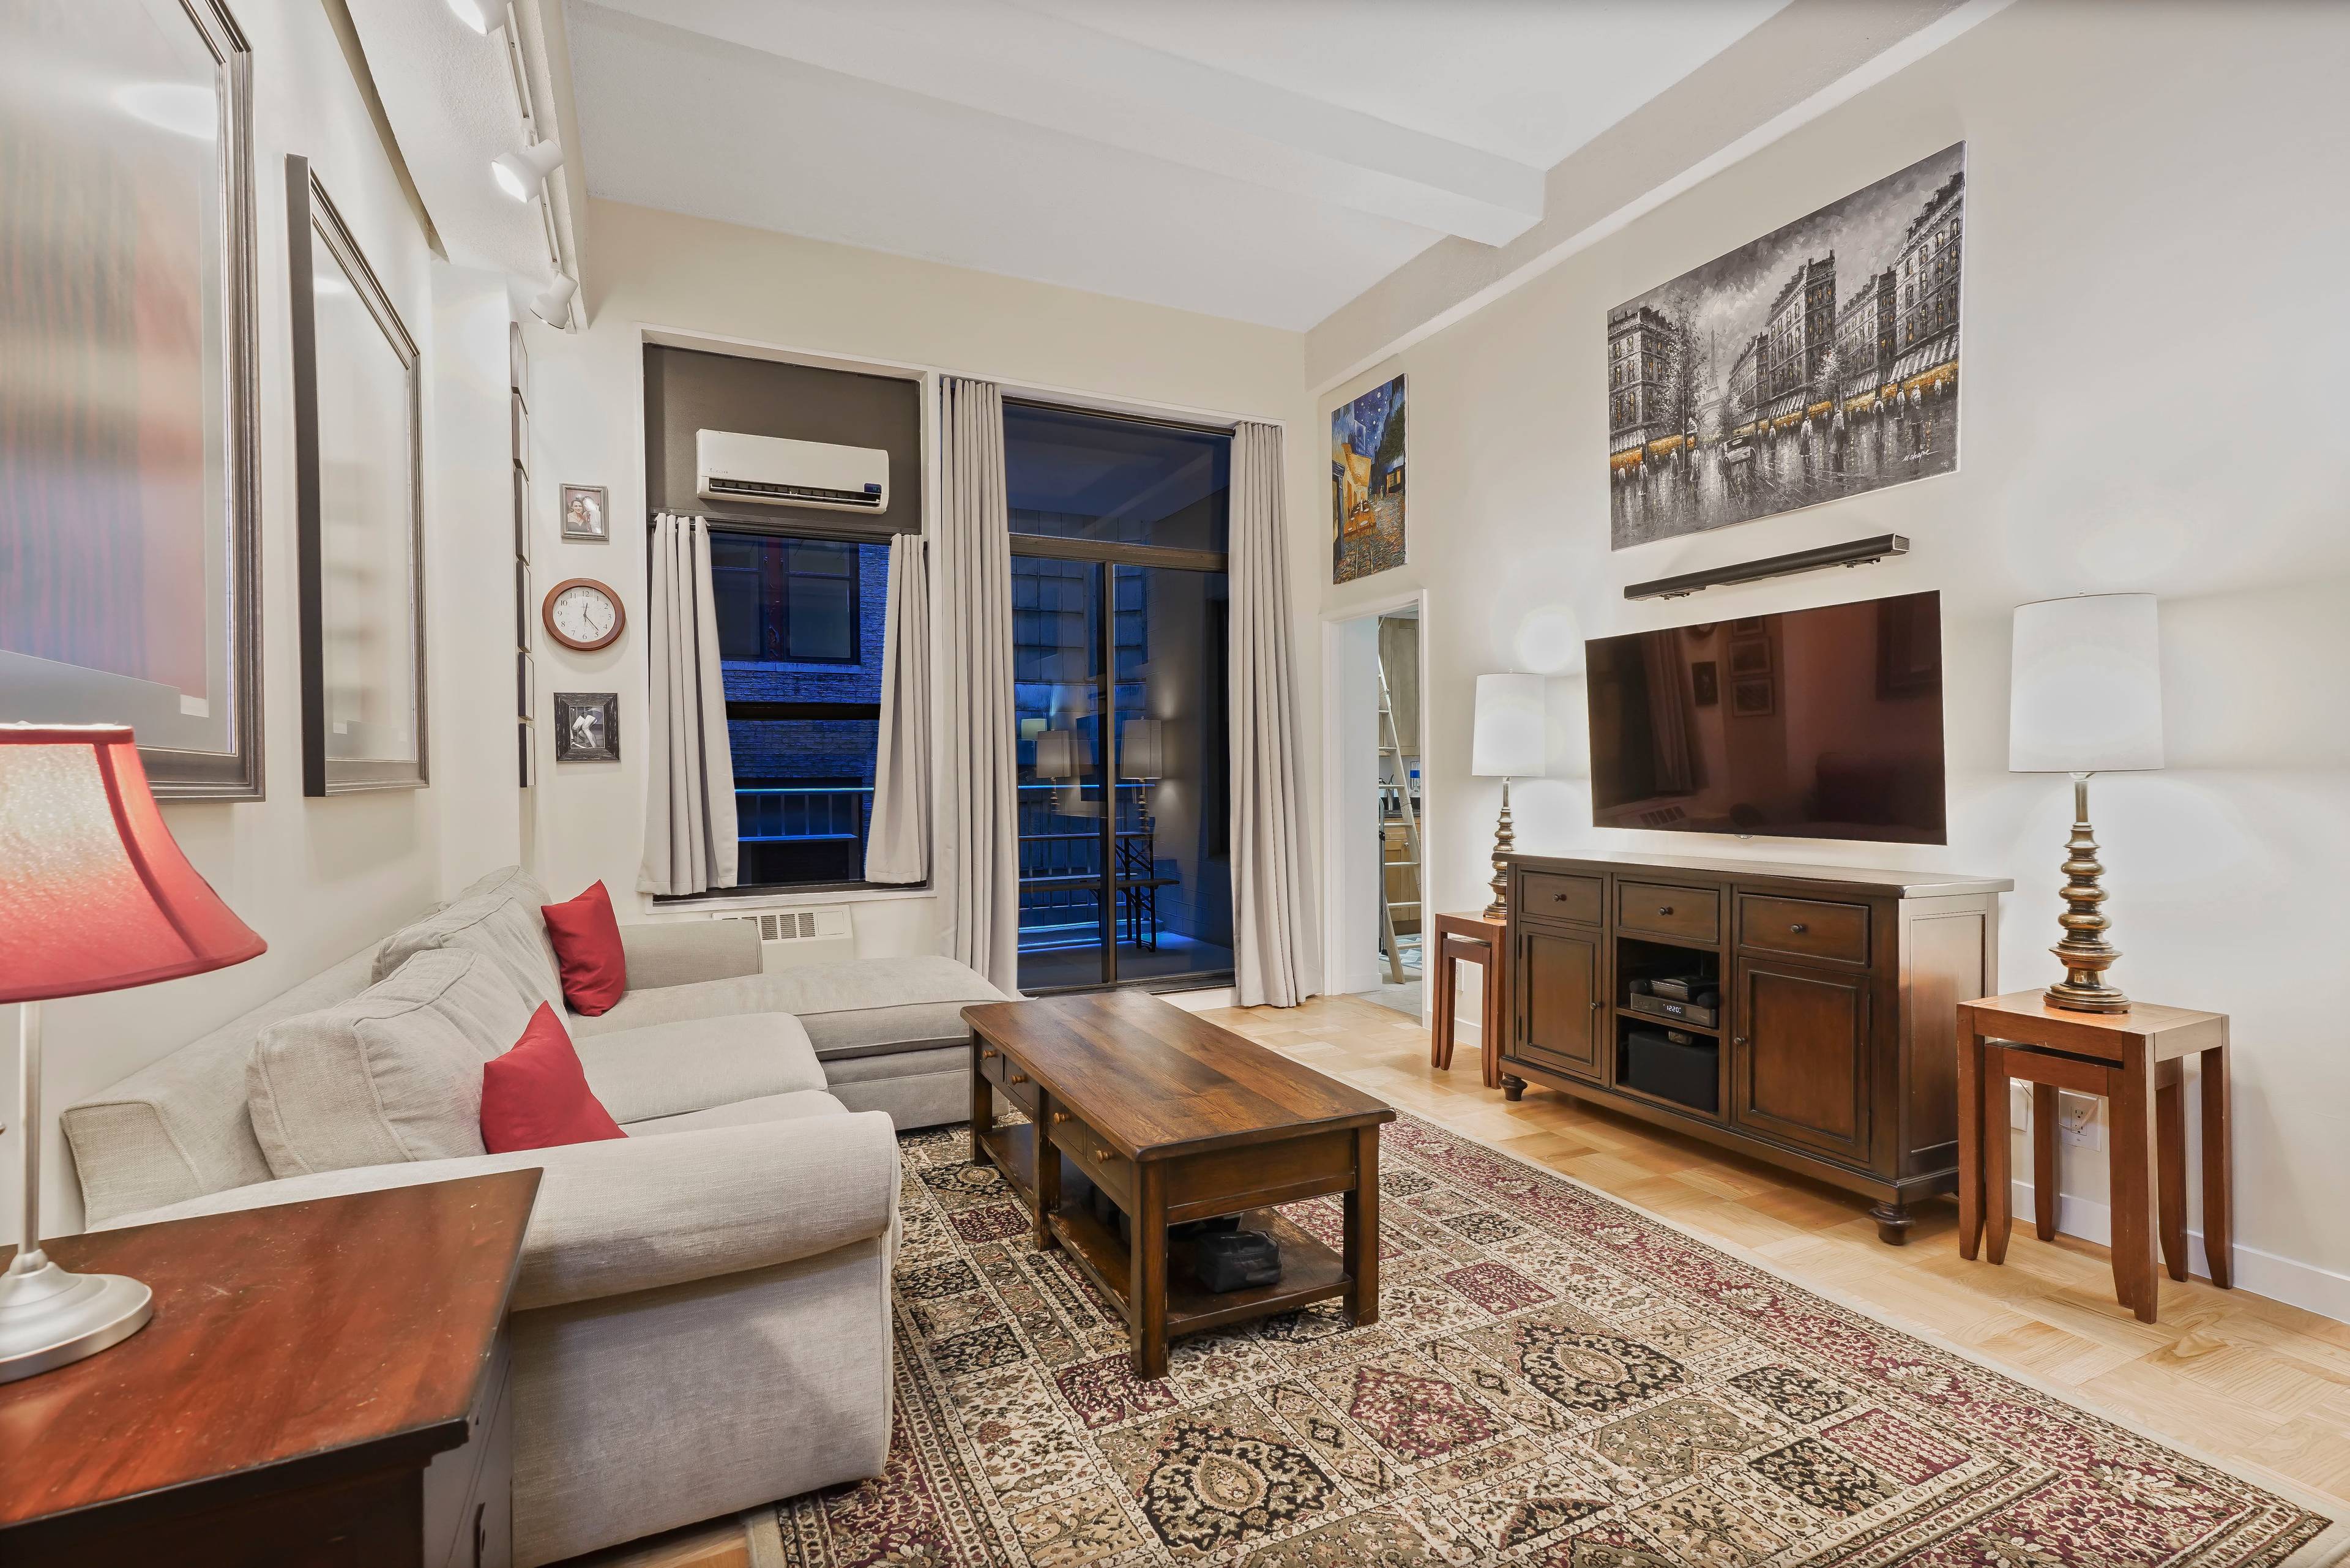 Conveniently located in Murray Hill, near Bryant Park, a plethora of dining and shopping options, public transportation and close proximity to the new LIRR Grand Central Terminal access, this one ...